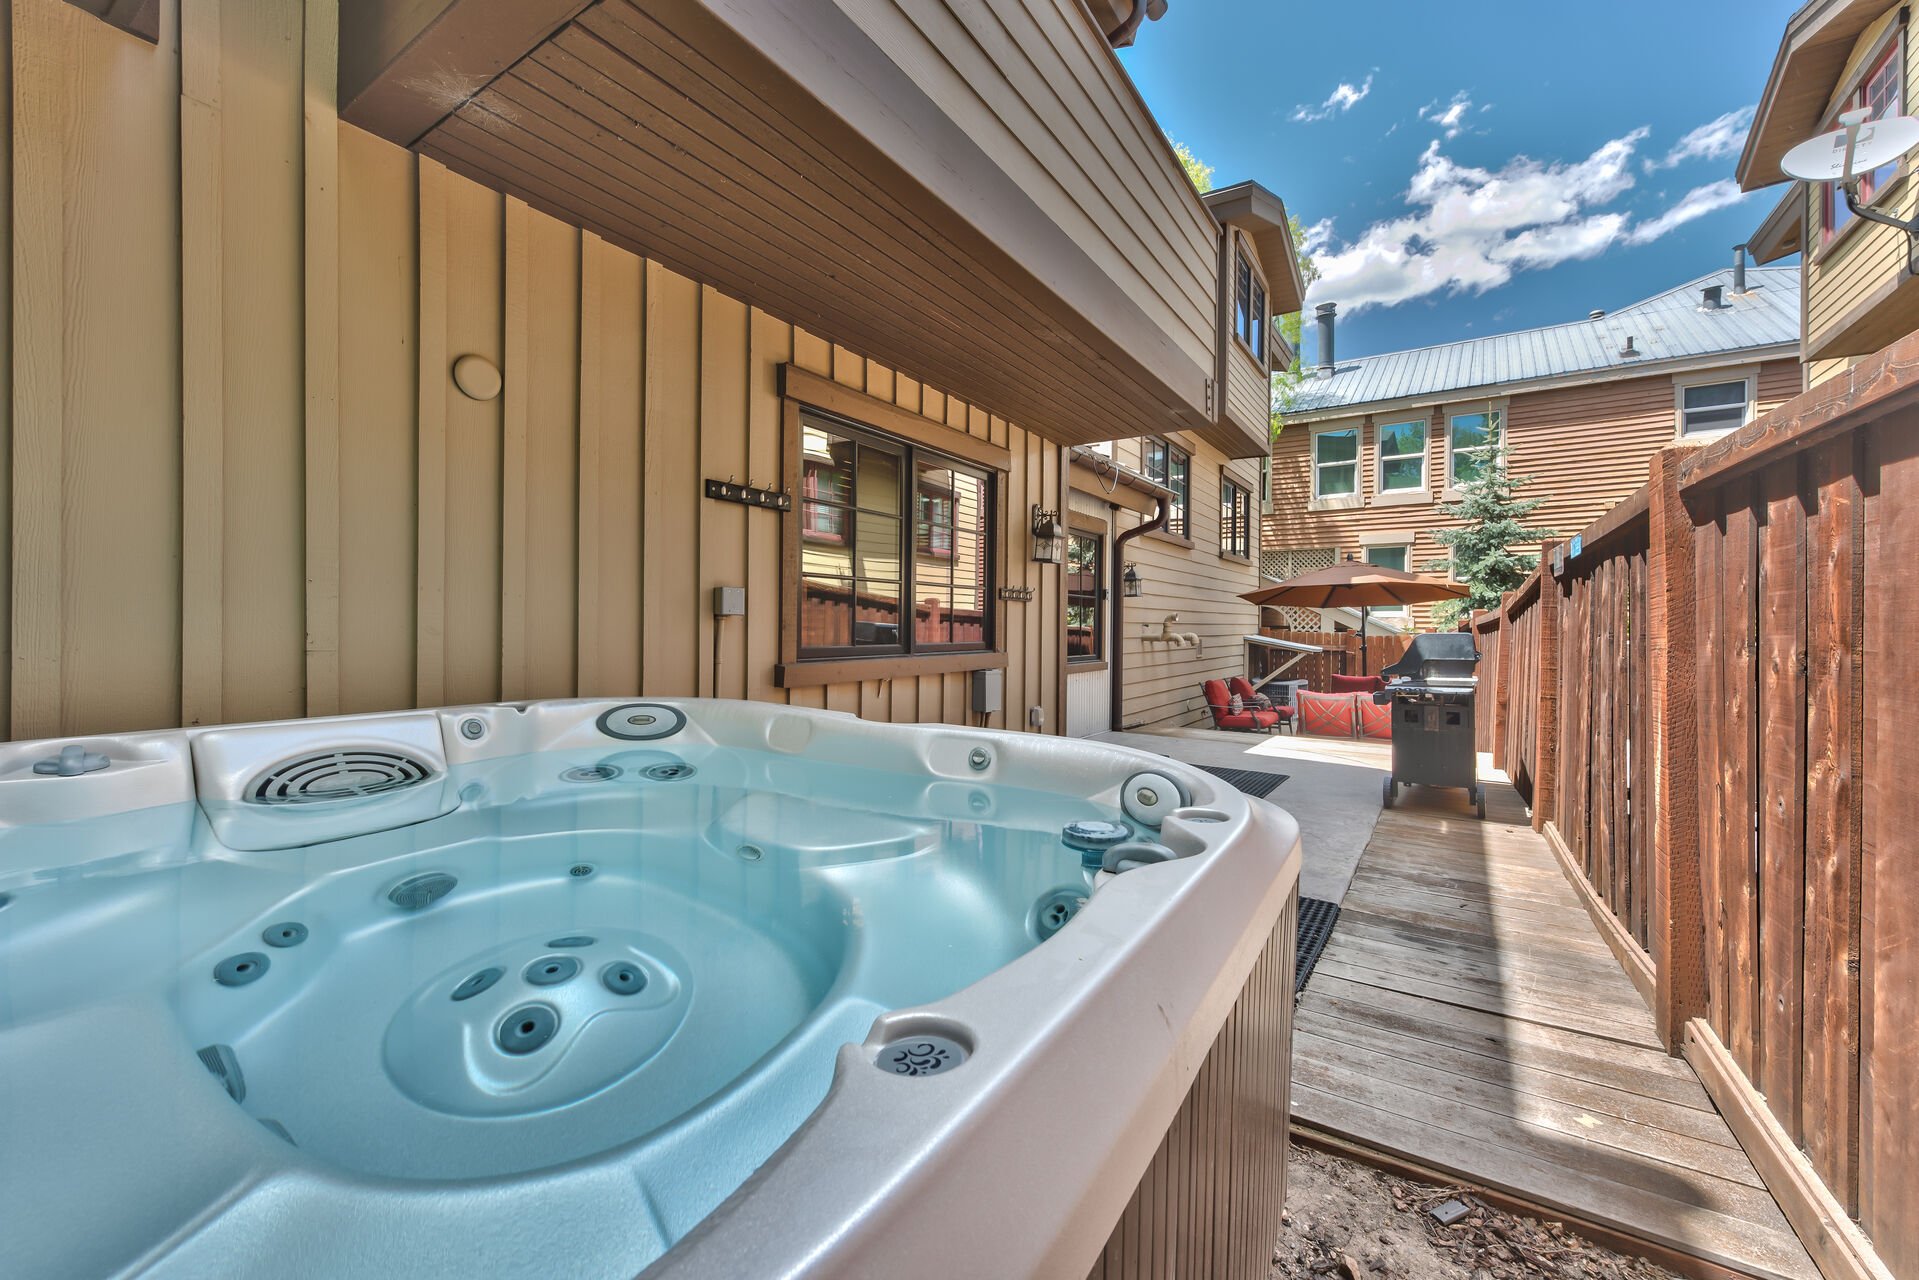 View our Park City rentals by amenities